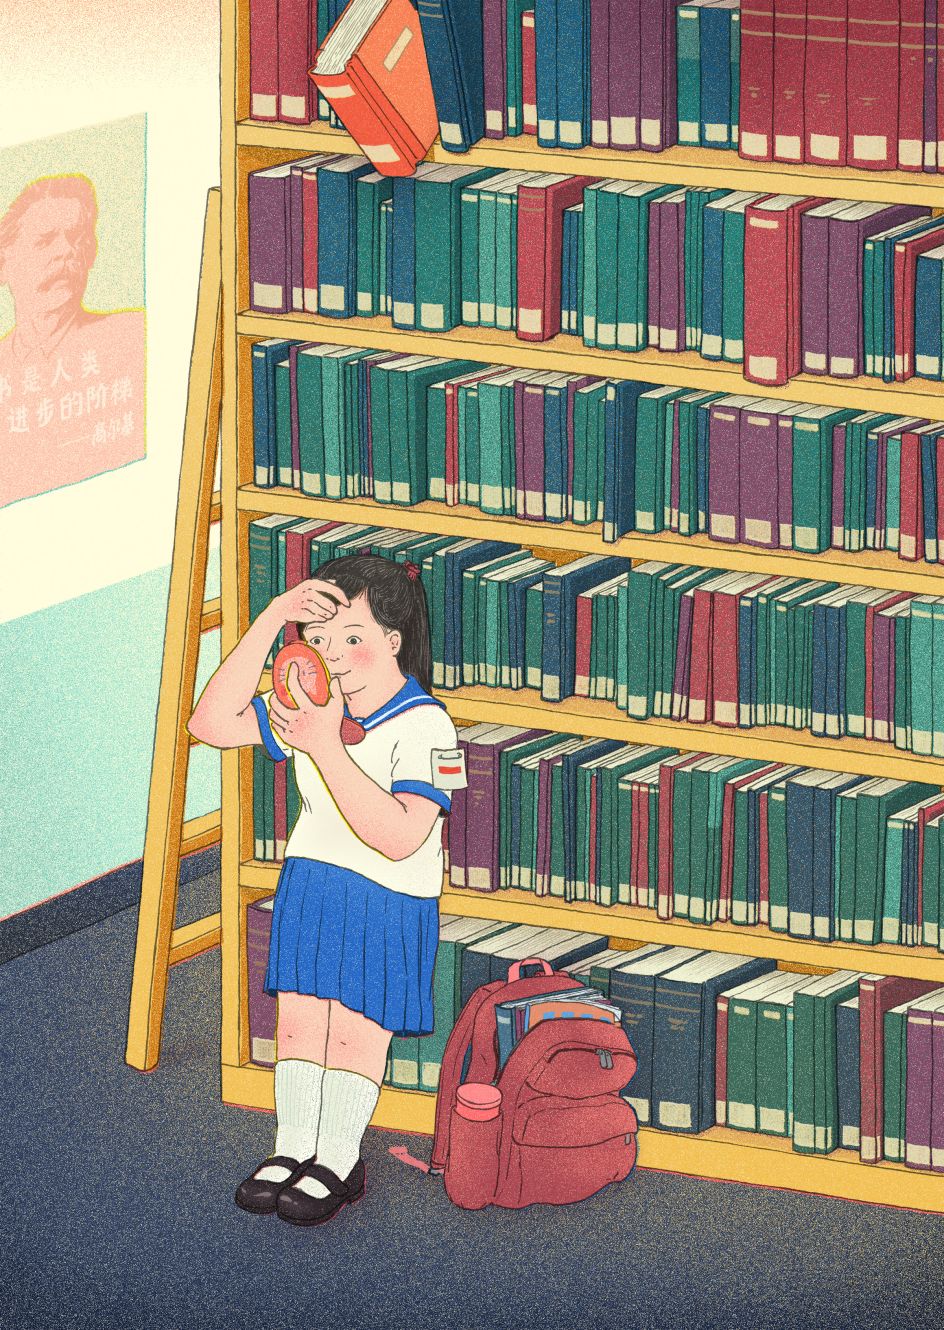 Focus on your books, not your looks © Xinmei Liu